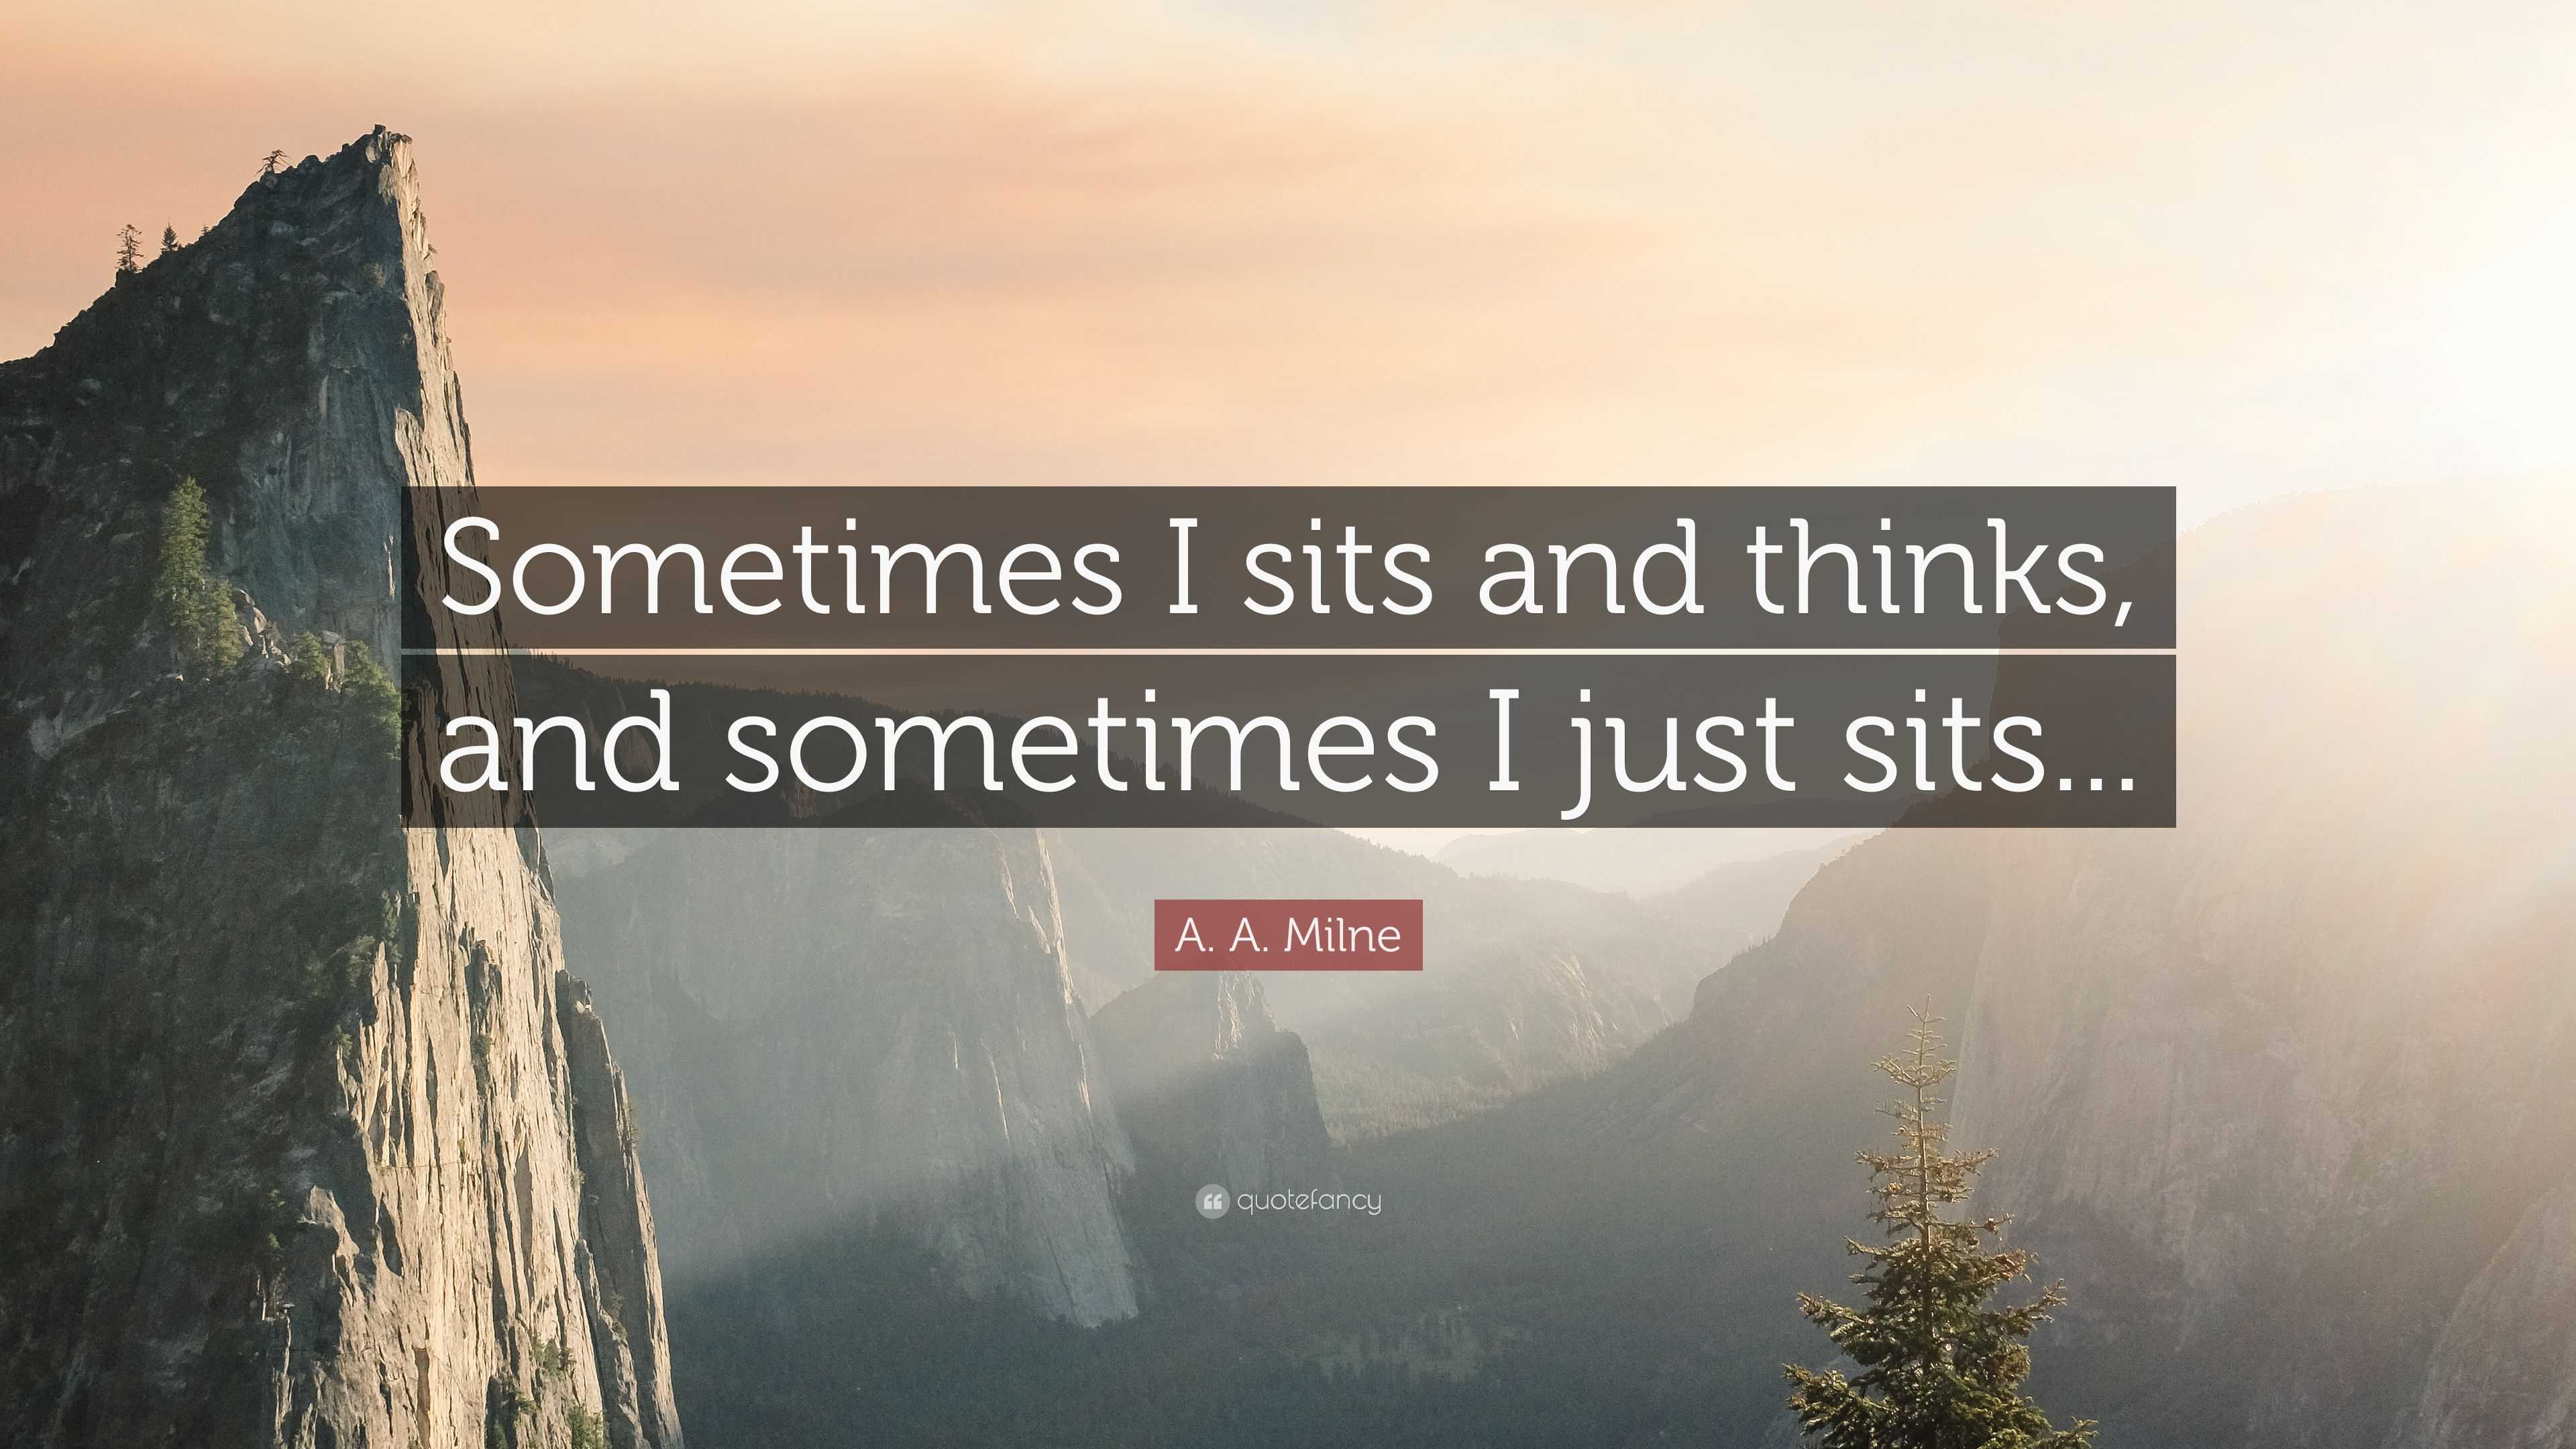 A A Milne Quote “sometimes I Sits And Thinks And Sometimes I Just Sits” 0028